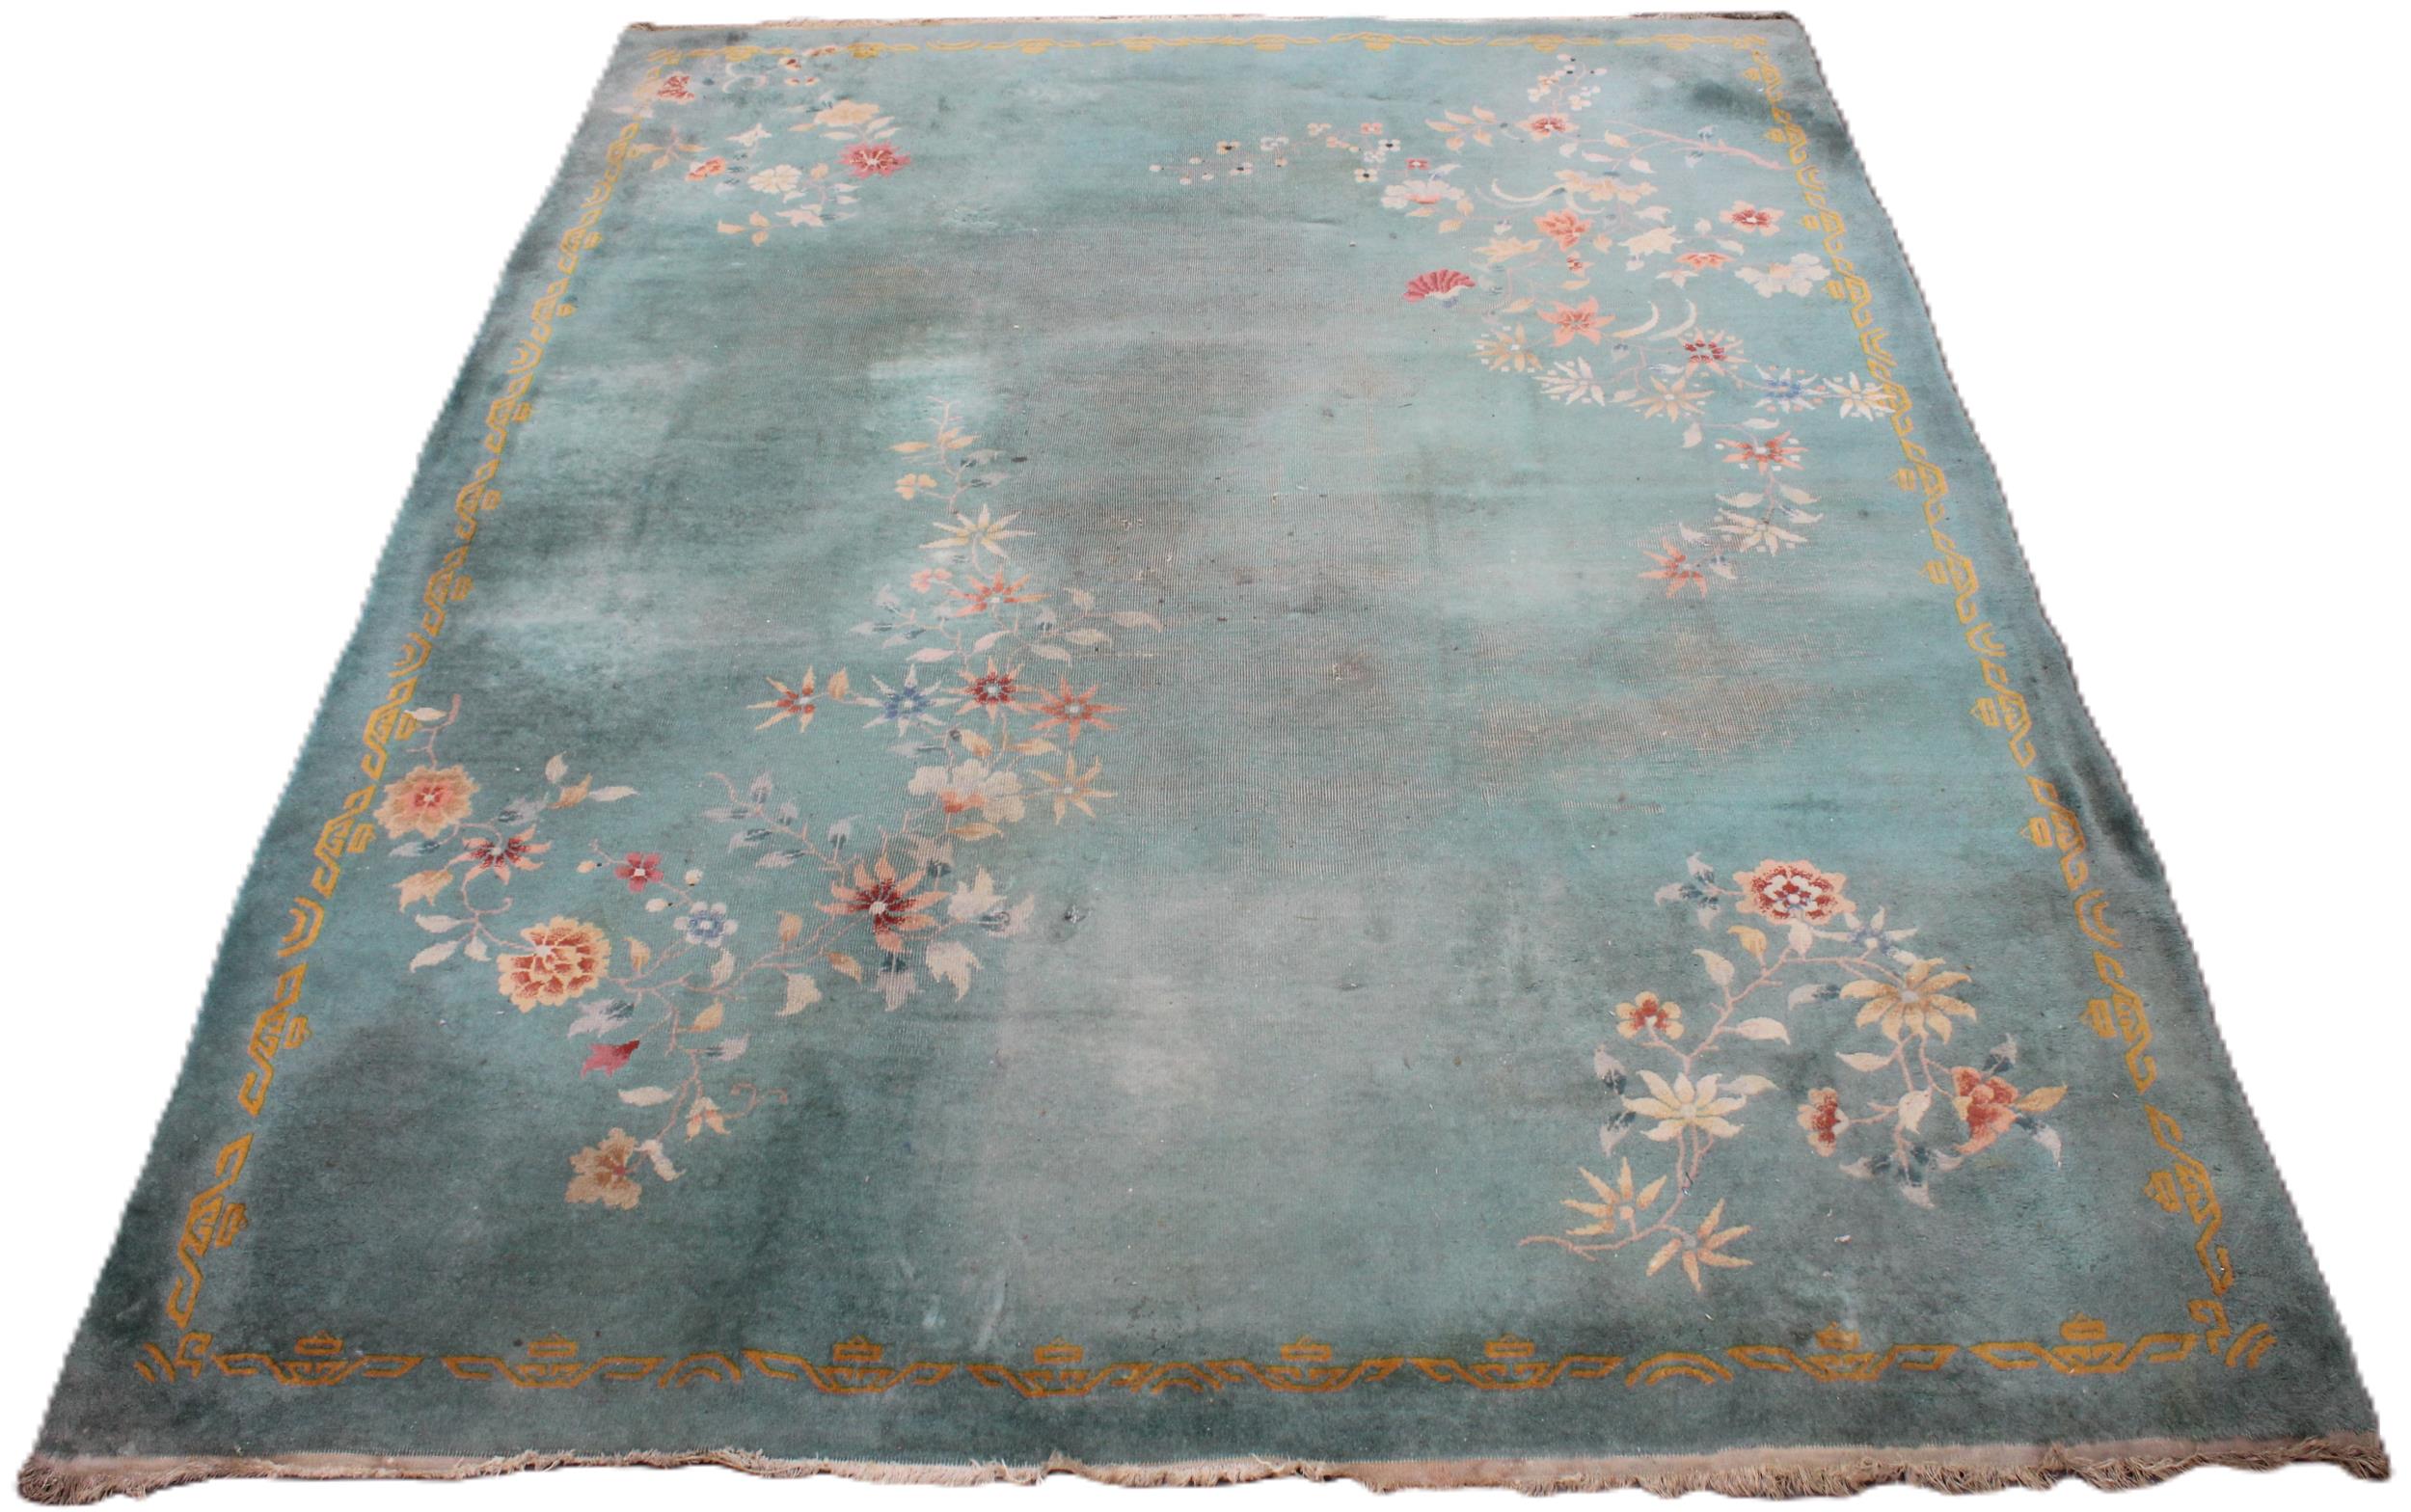 A large Chinese wool carpet, early 20th century, with floral motifs against a duck egg blue